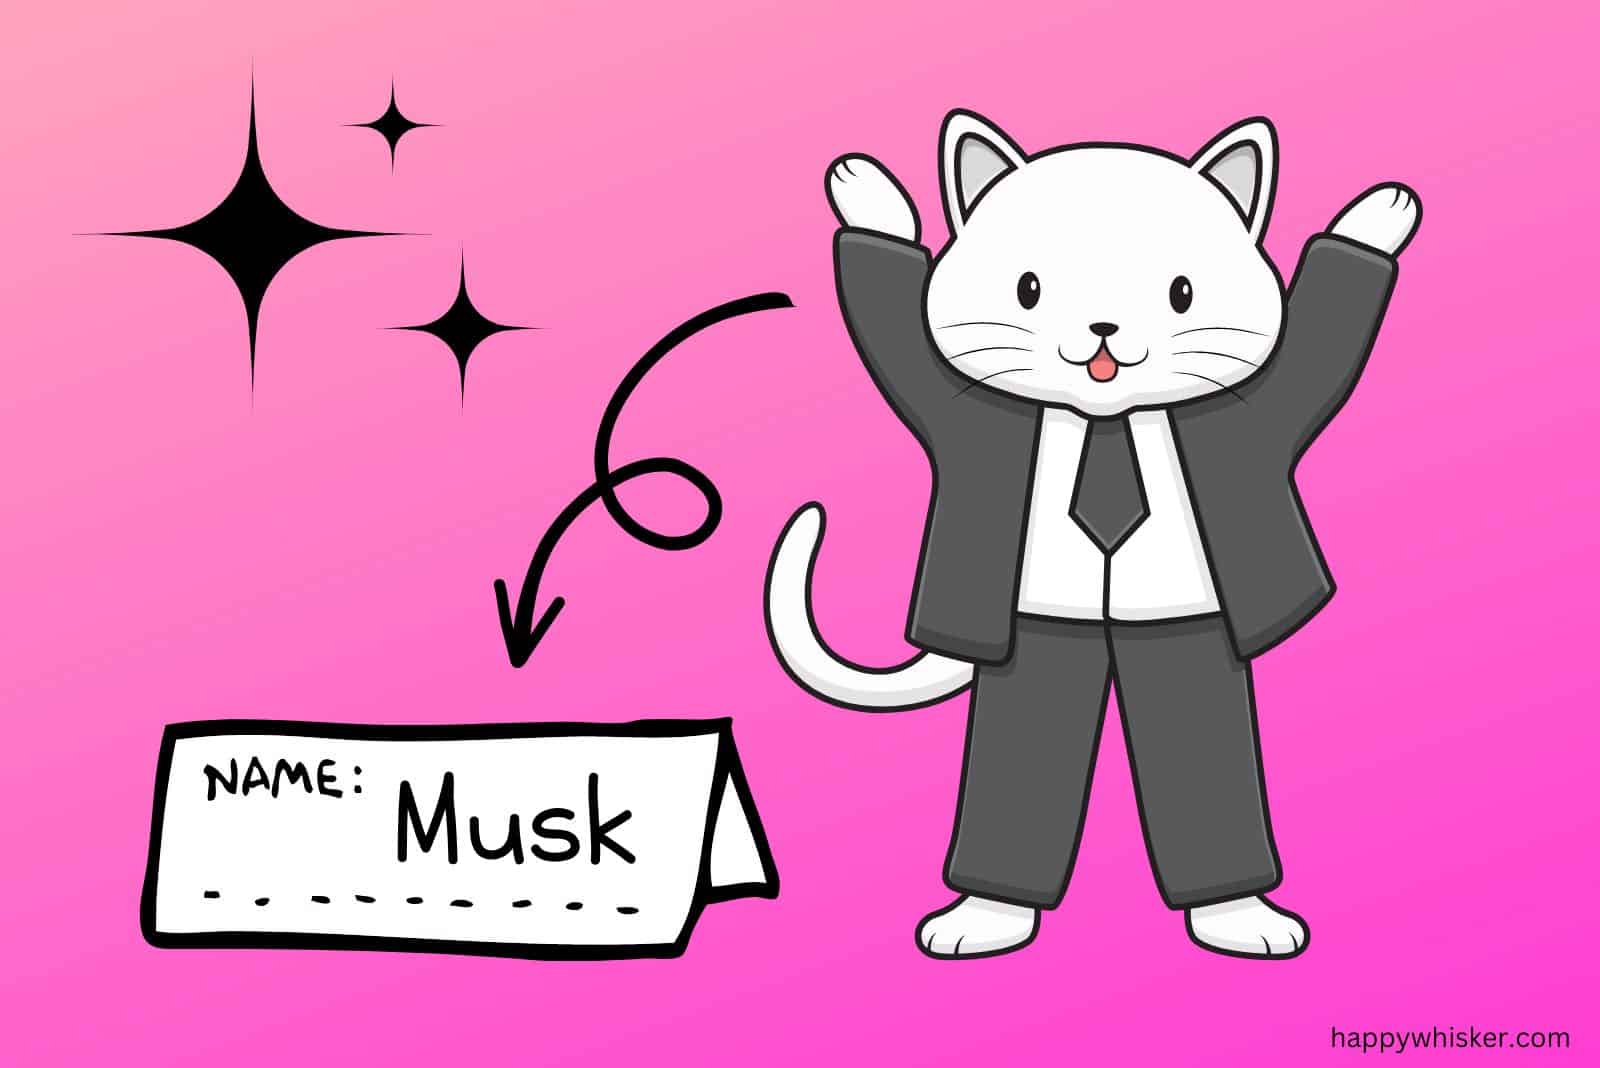 Musk name and cat in suit